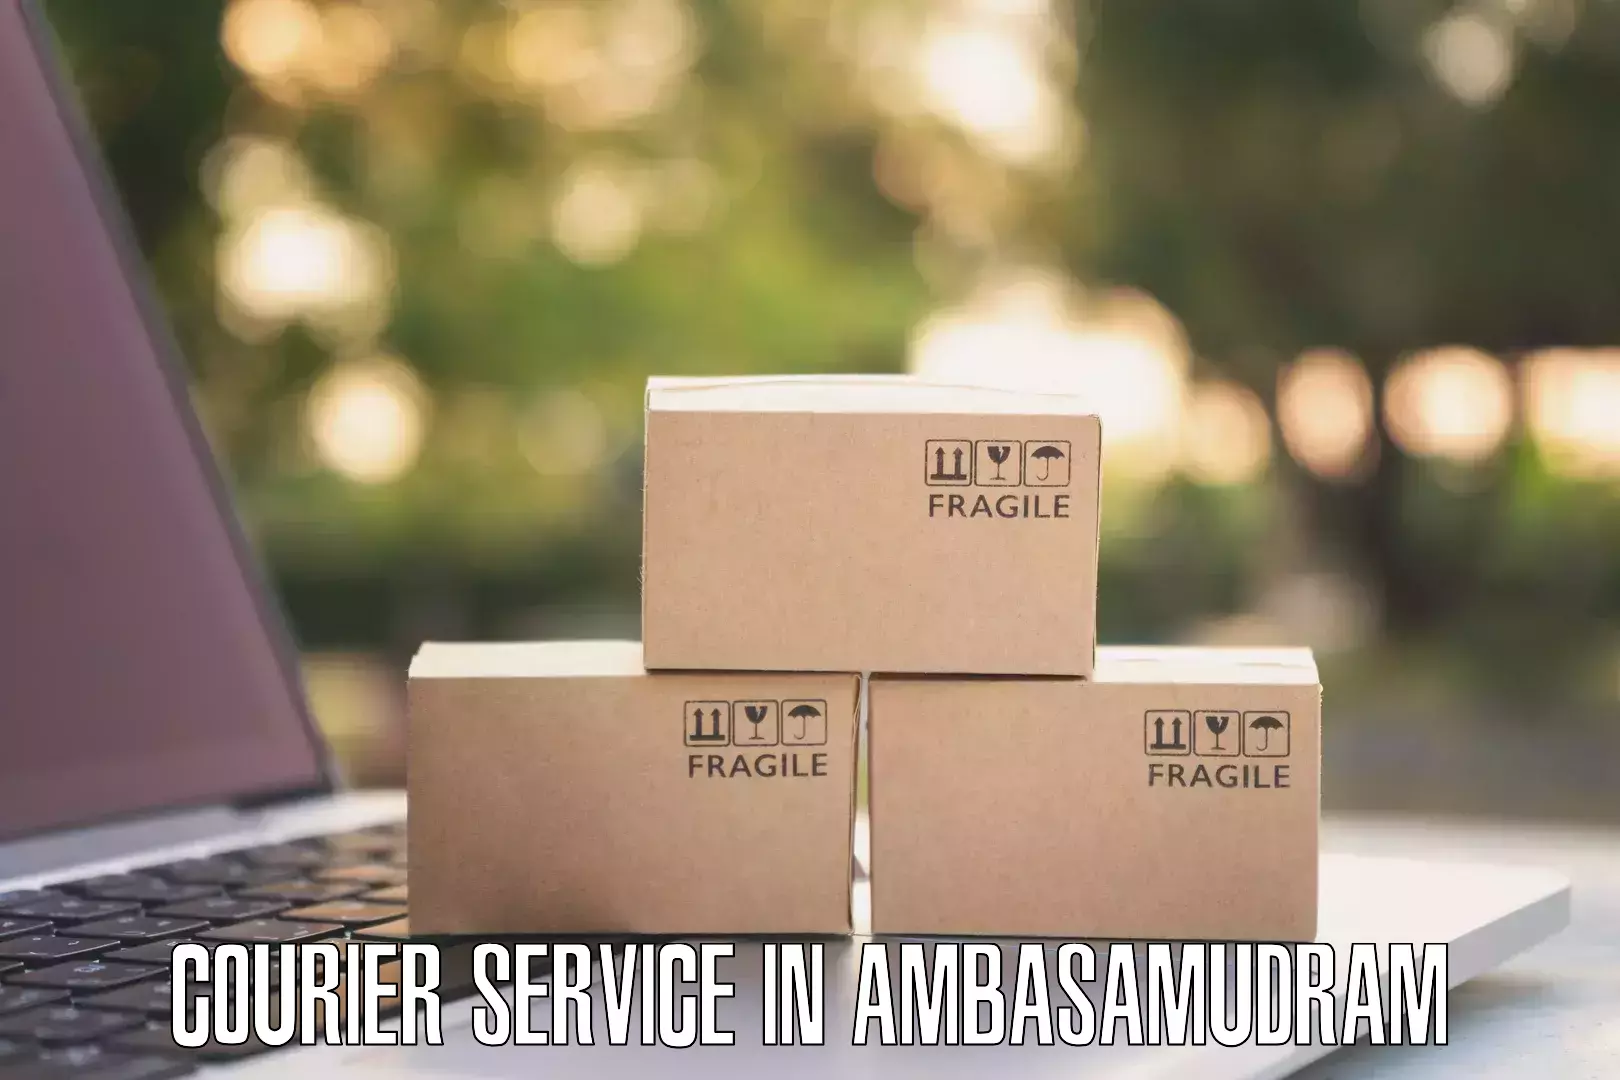 Secure package delivery in Ambasamudram